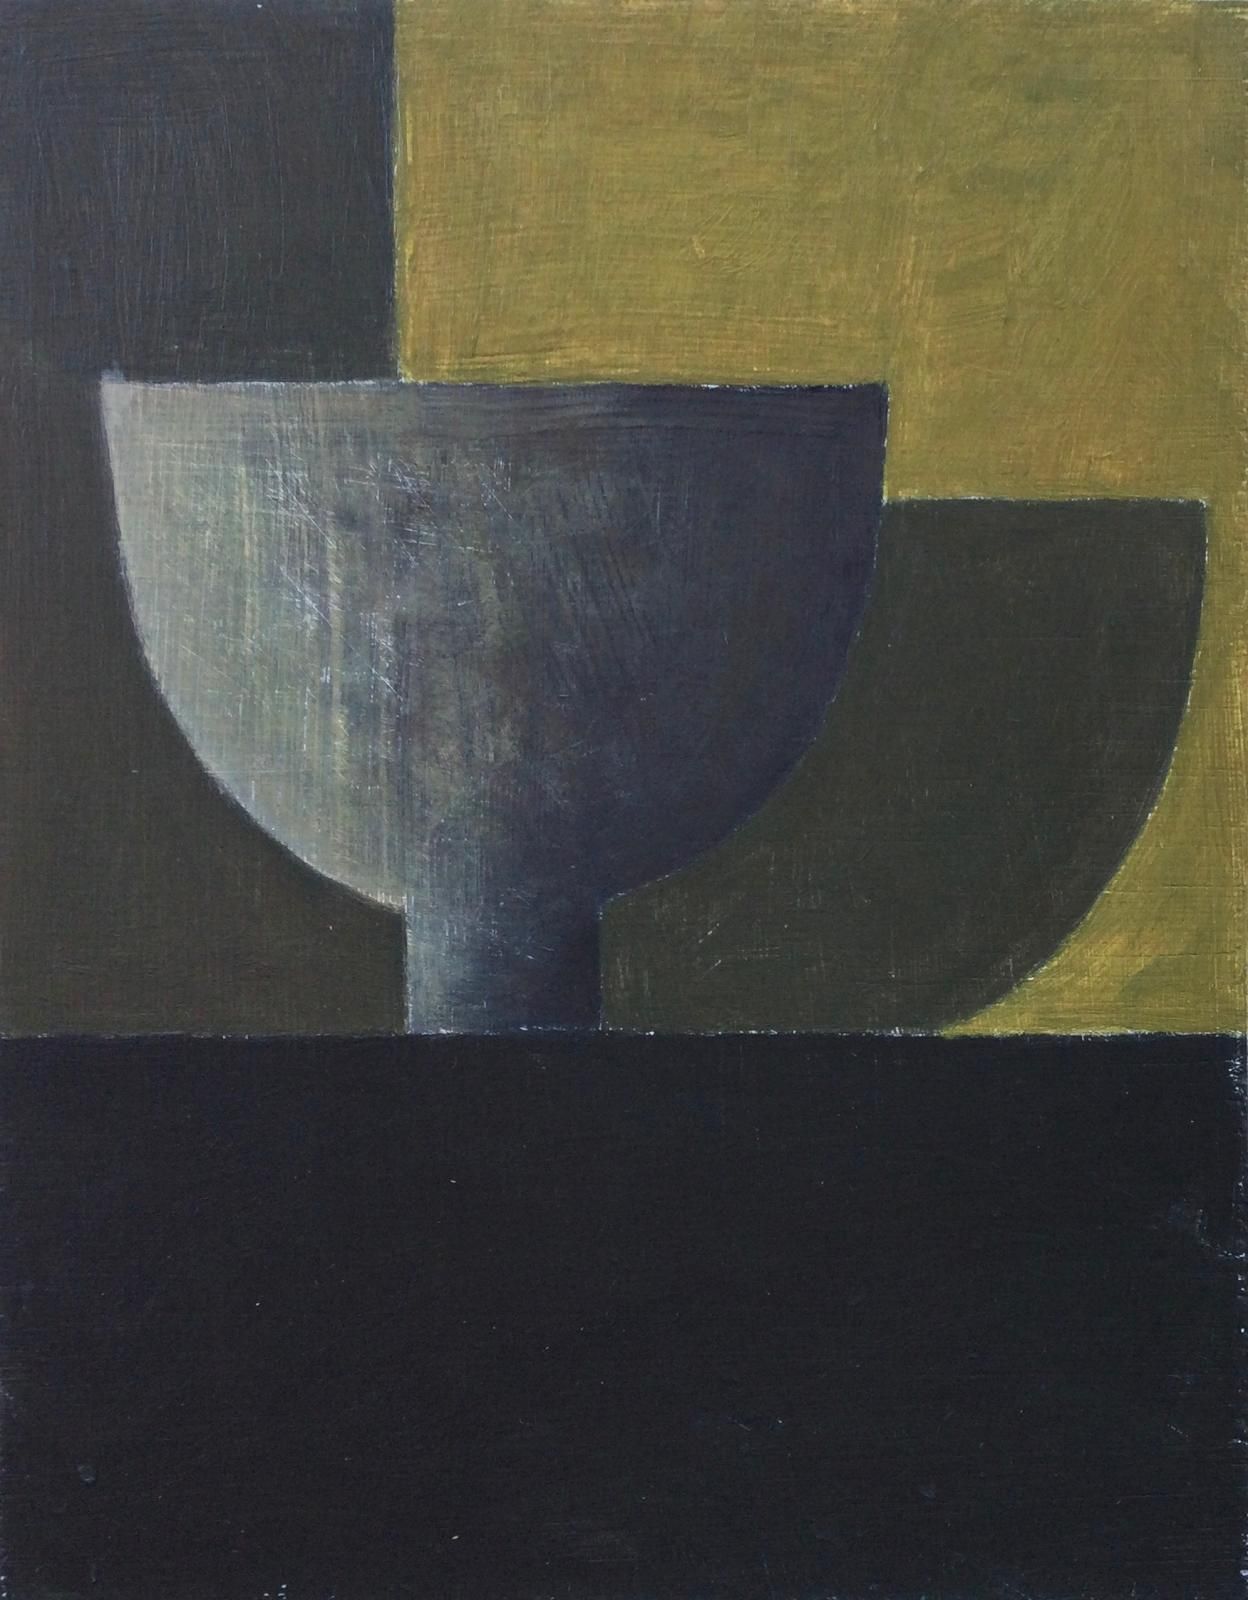 Black Bowl (End of the Day) by Philip Lyons